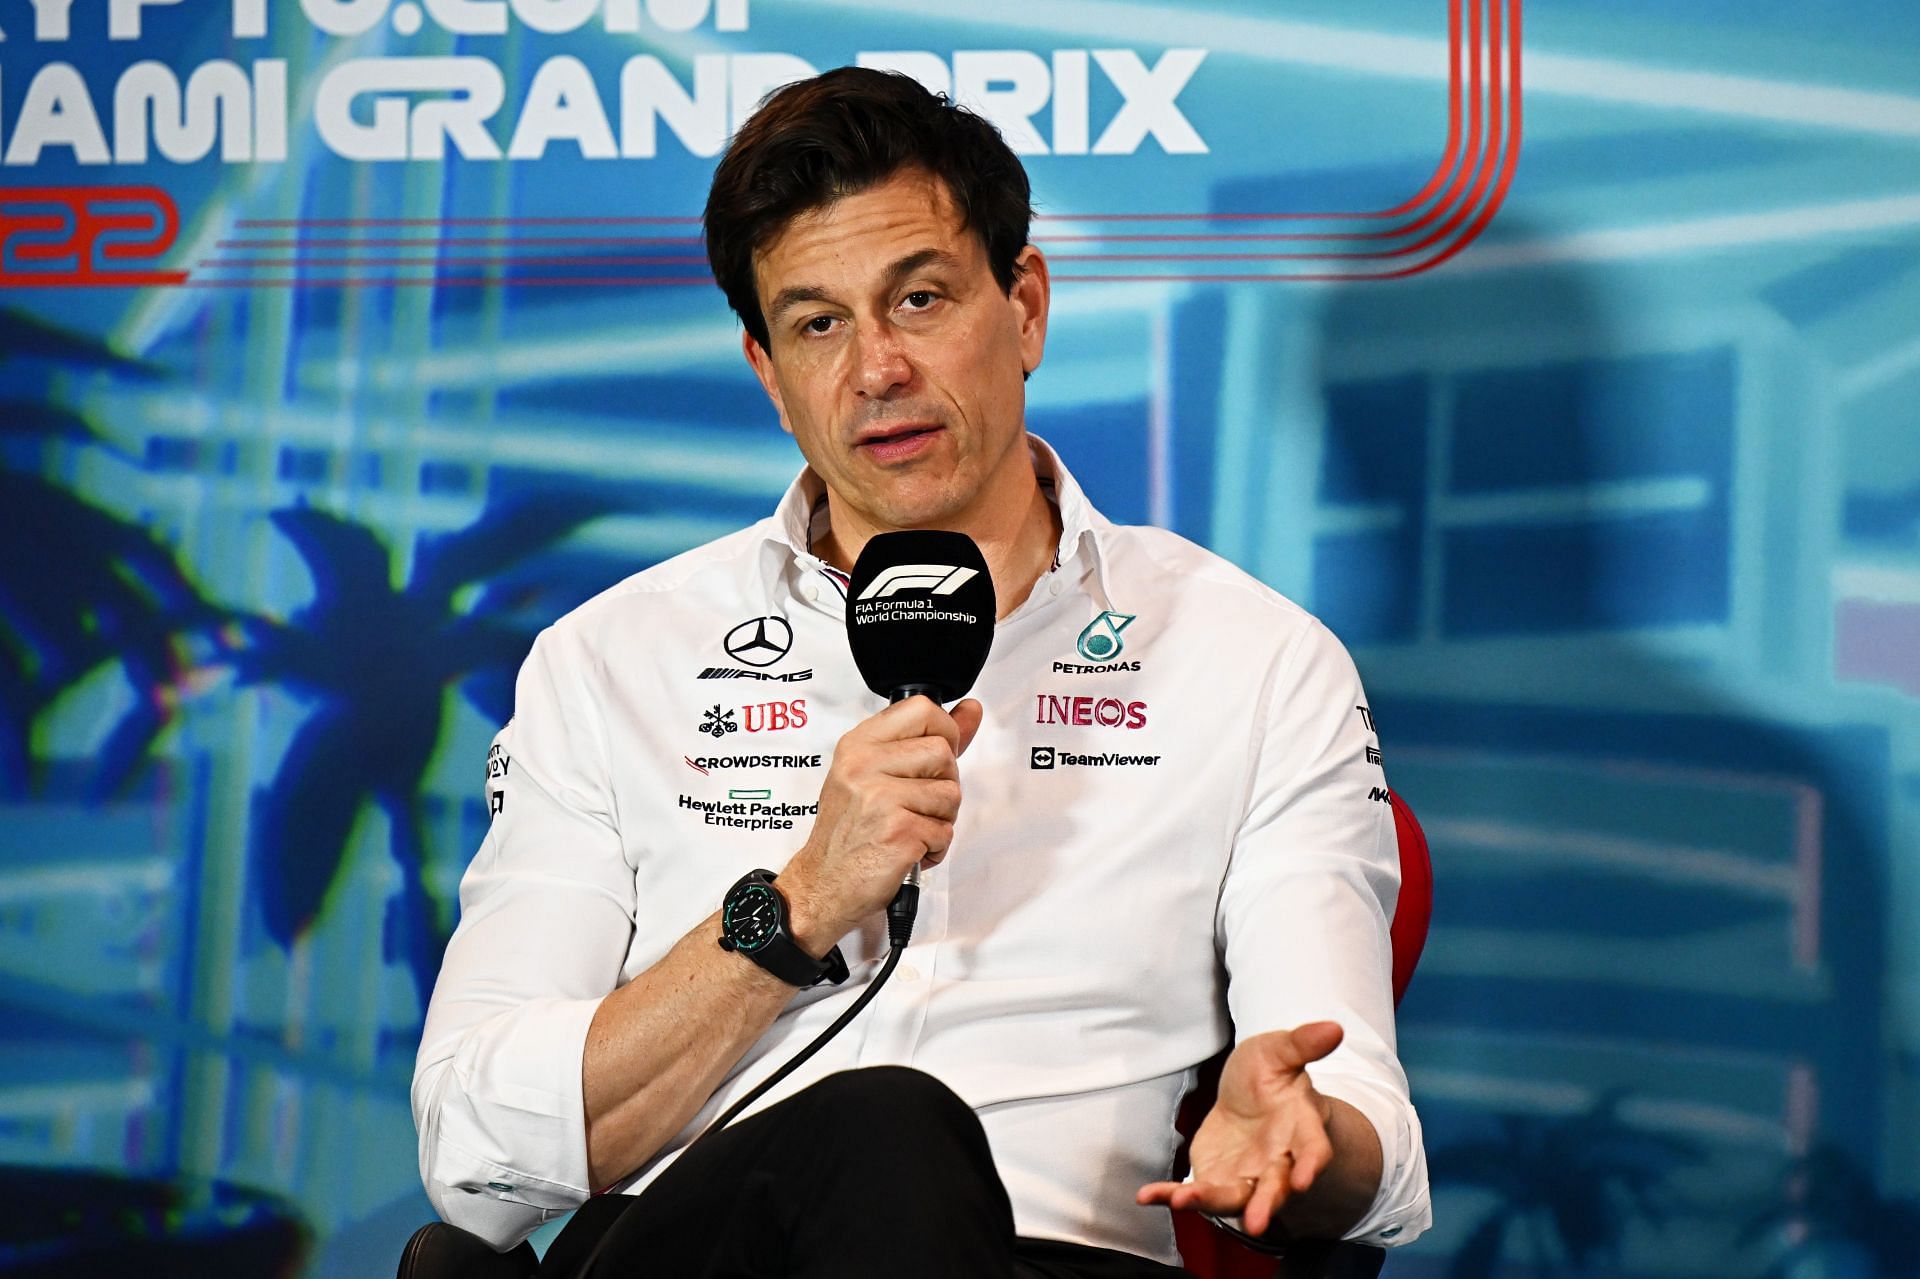 Toto Wolff&#039;s comments about F1 being &quot;boring&quot; has caused an outrage